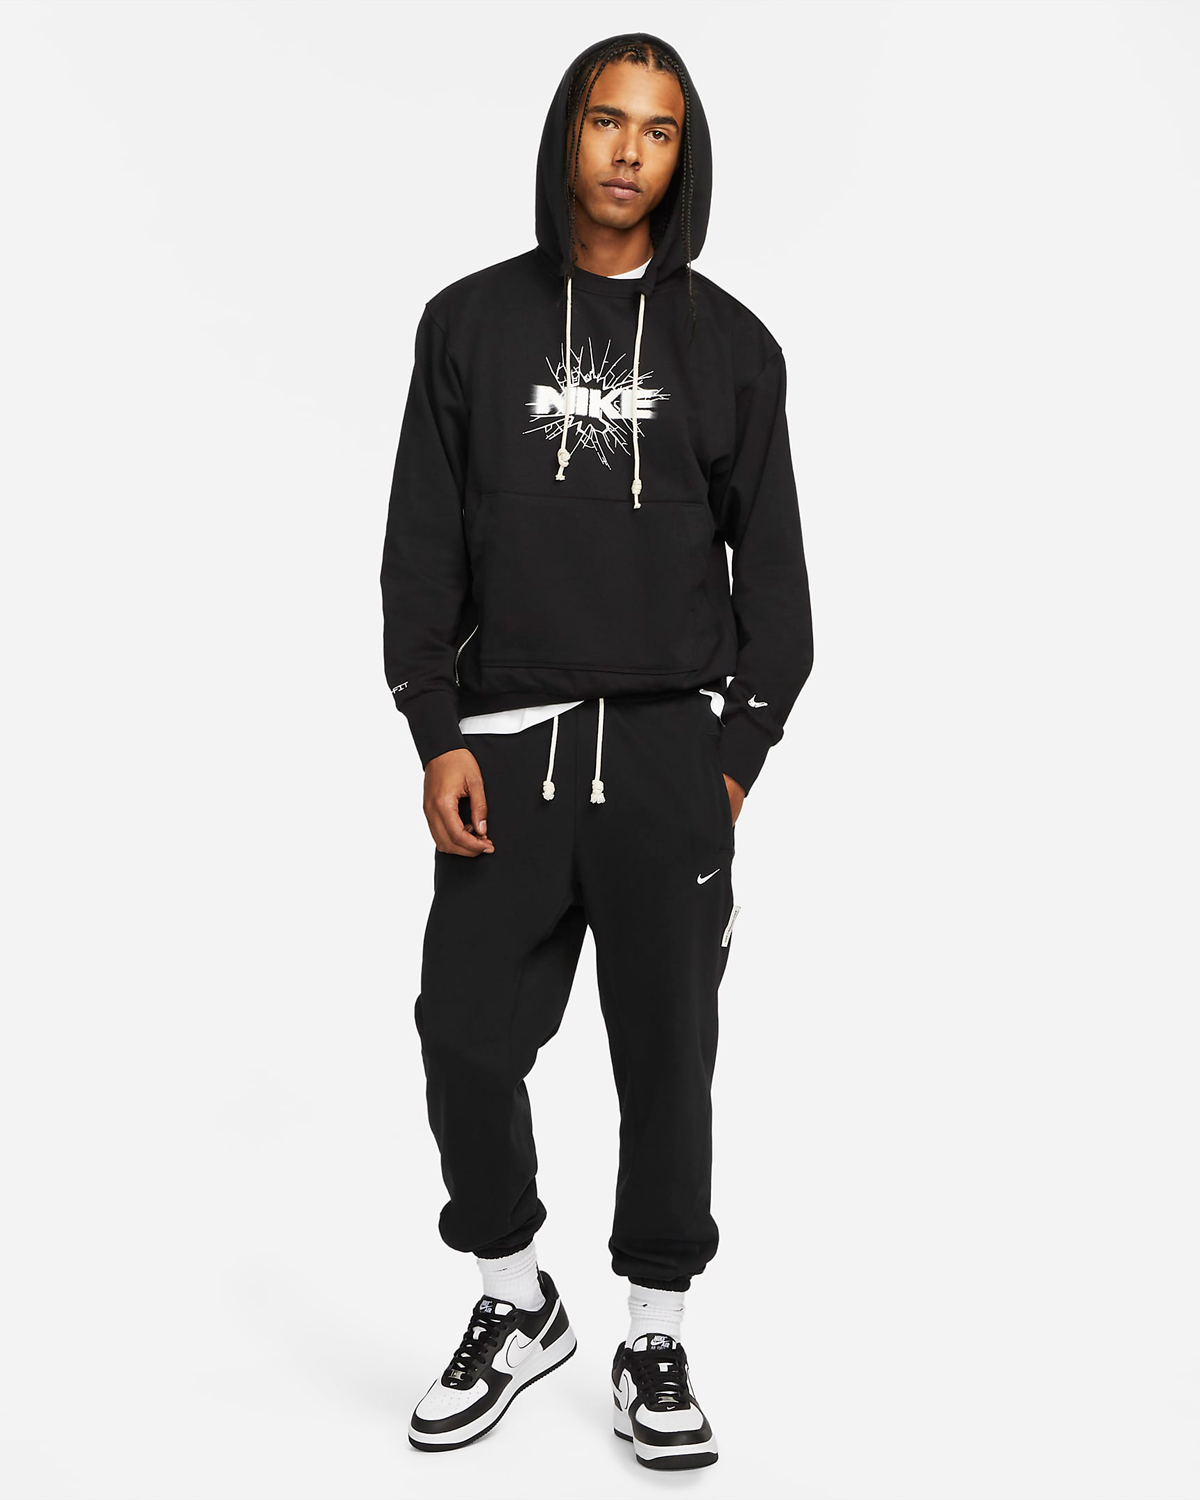 Nike-Standard-Issue-Hoodie-Black-White-Outfit